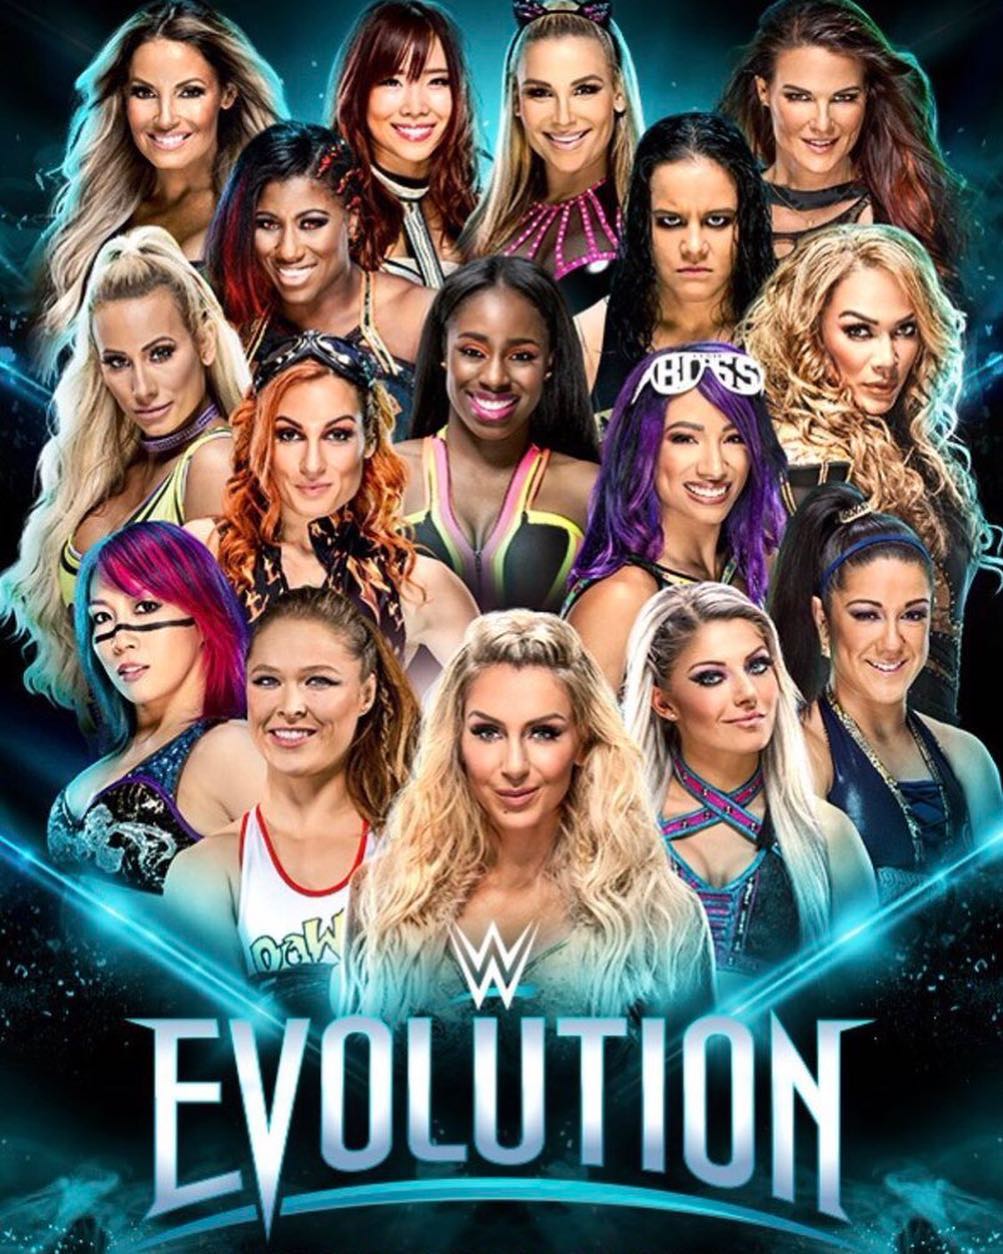 Check Out the Poster for WWE Evolution